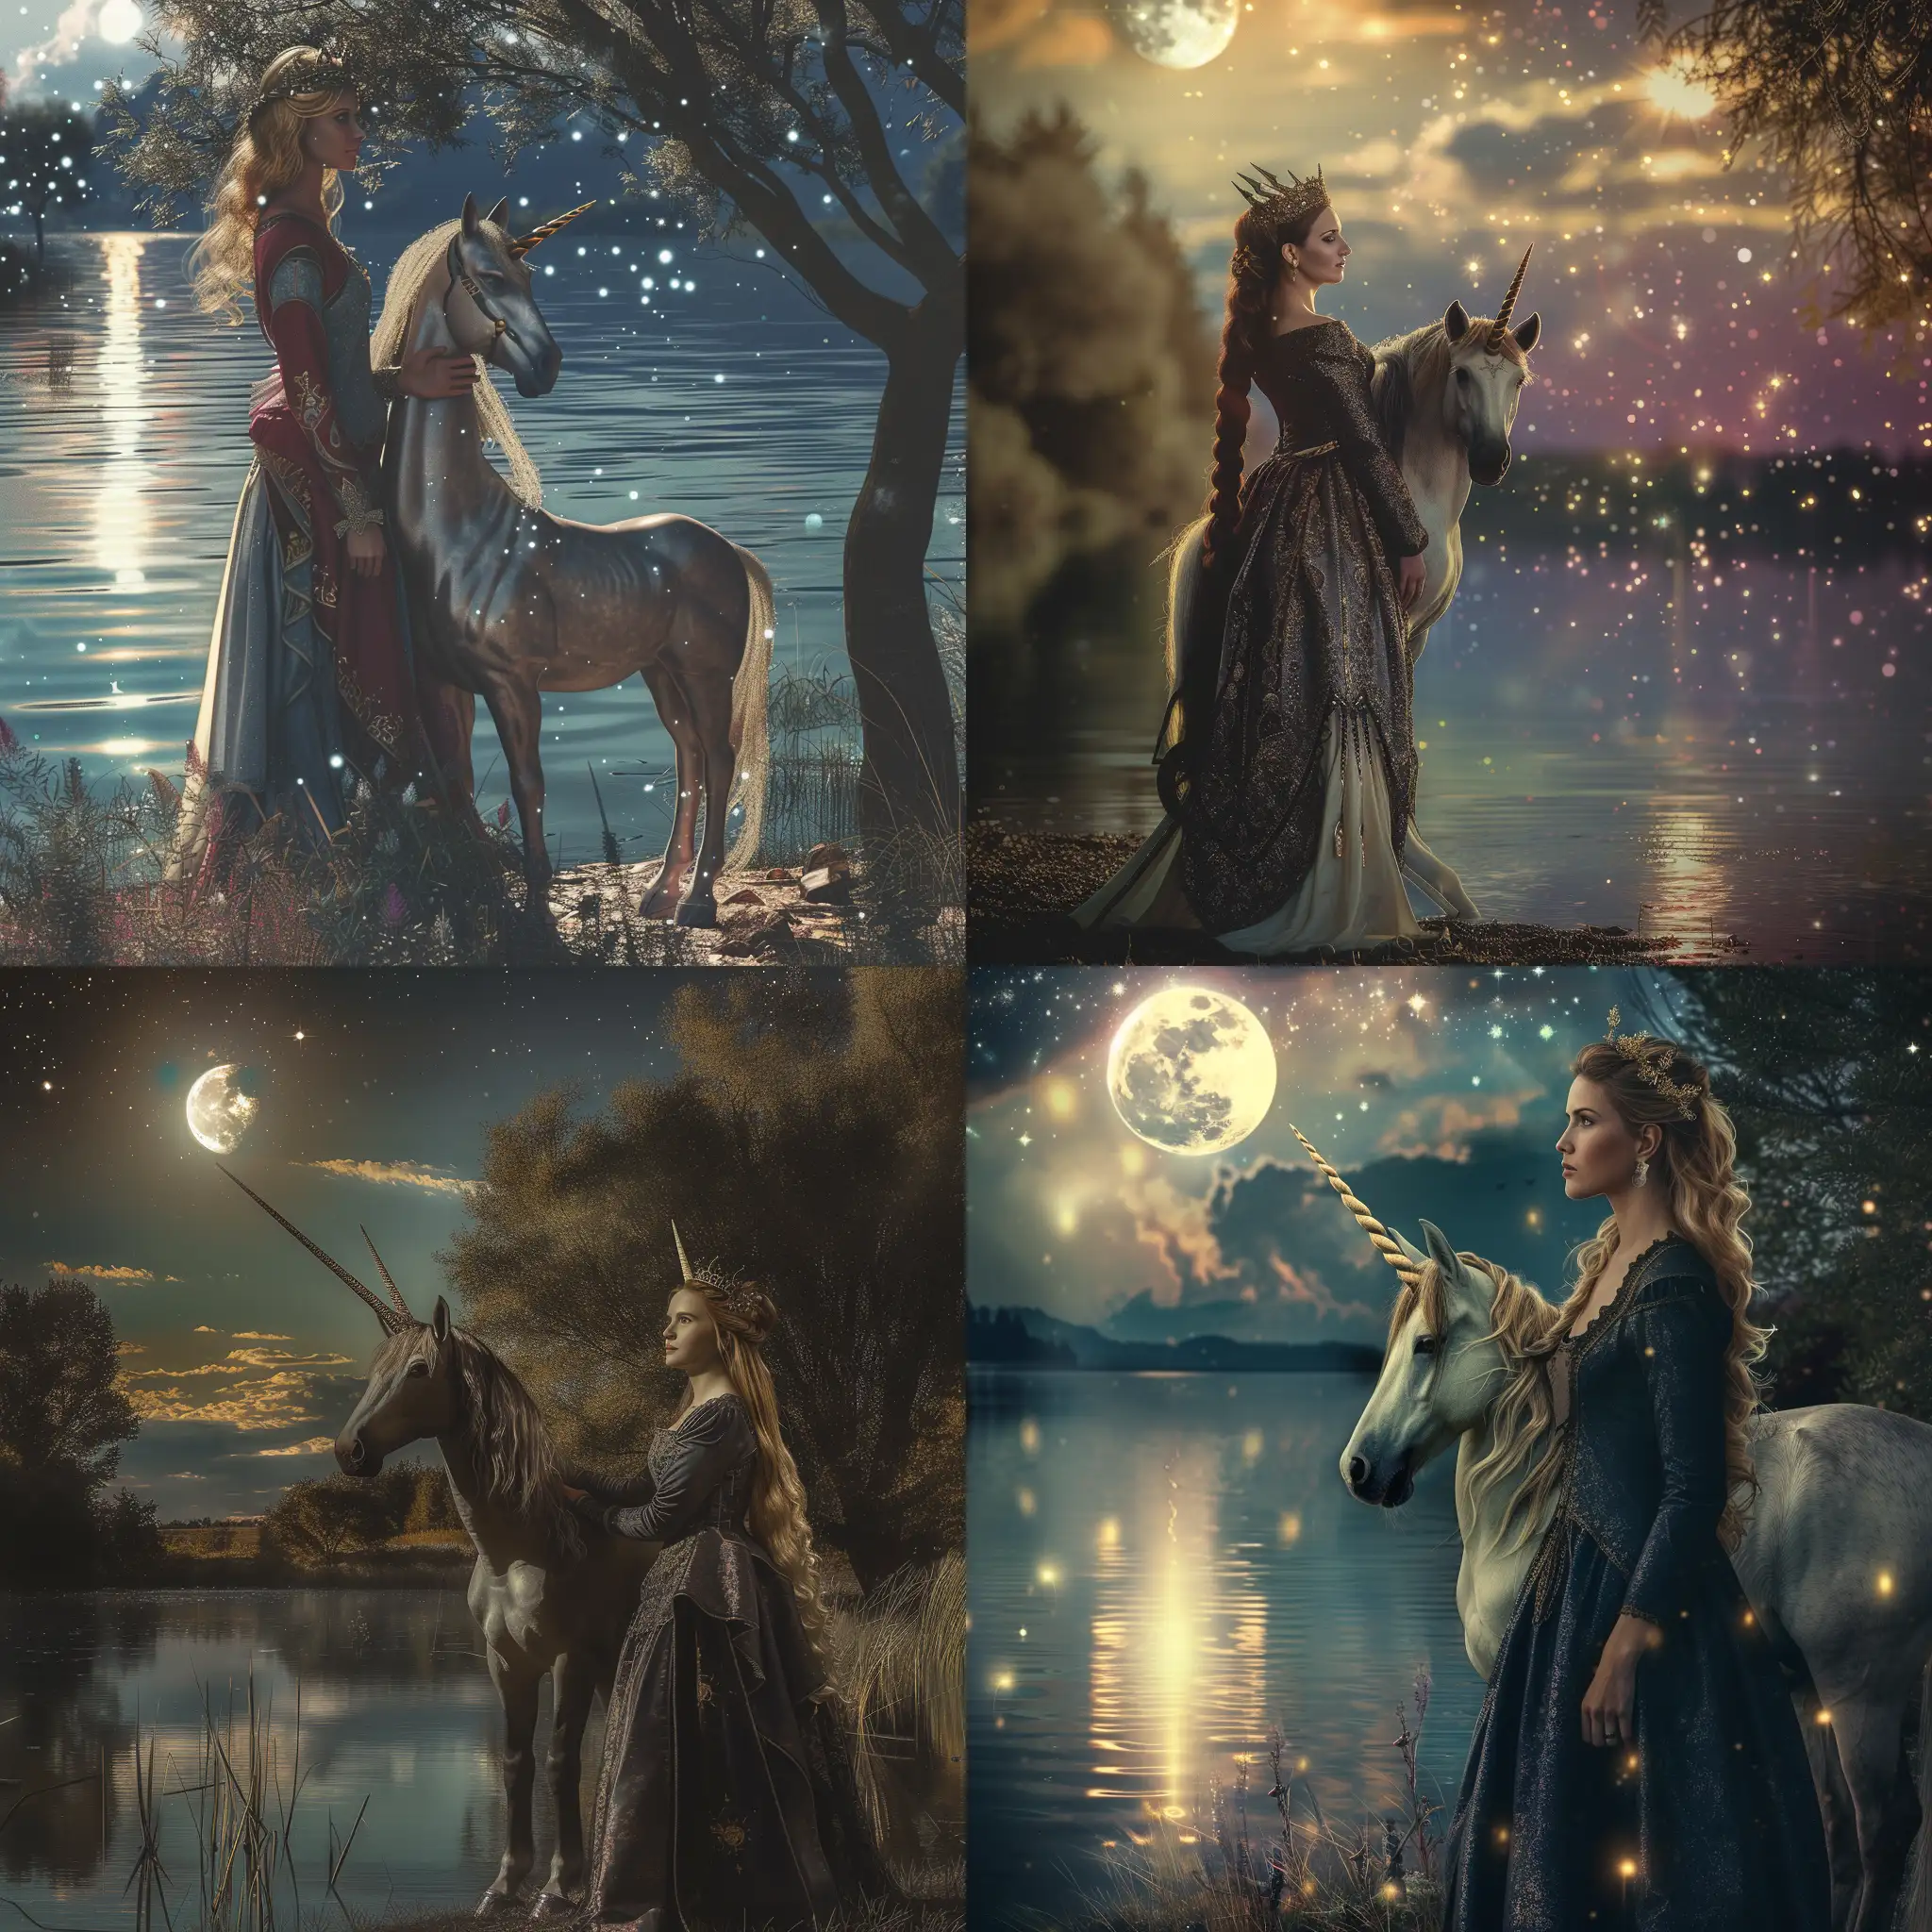 Enchanting-Medieval-Woman-and-Unicorn-by-the-Moonlit-Lake